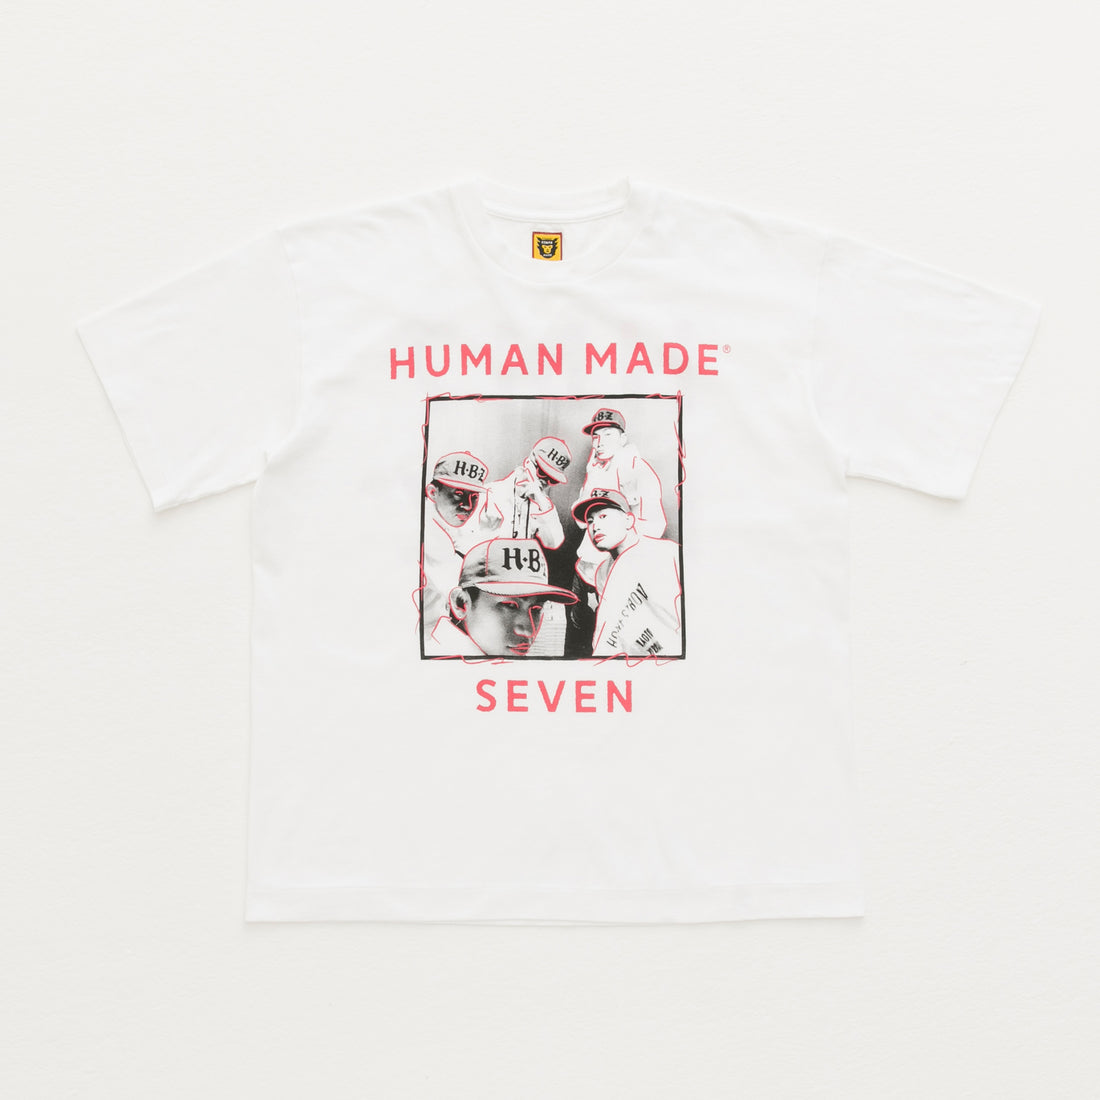 Latest In: Human Made - Seven Store